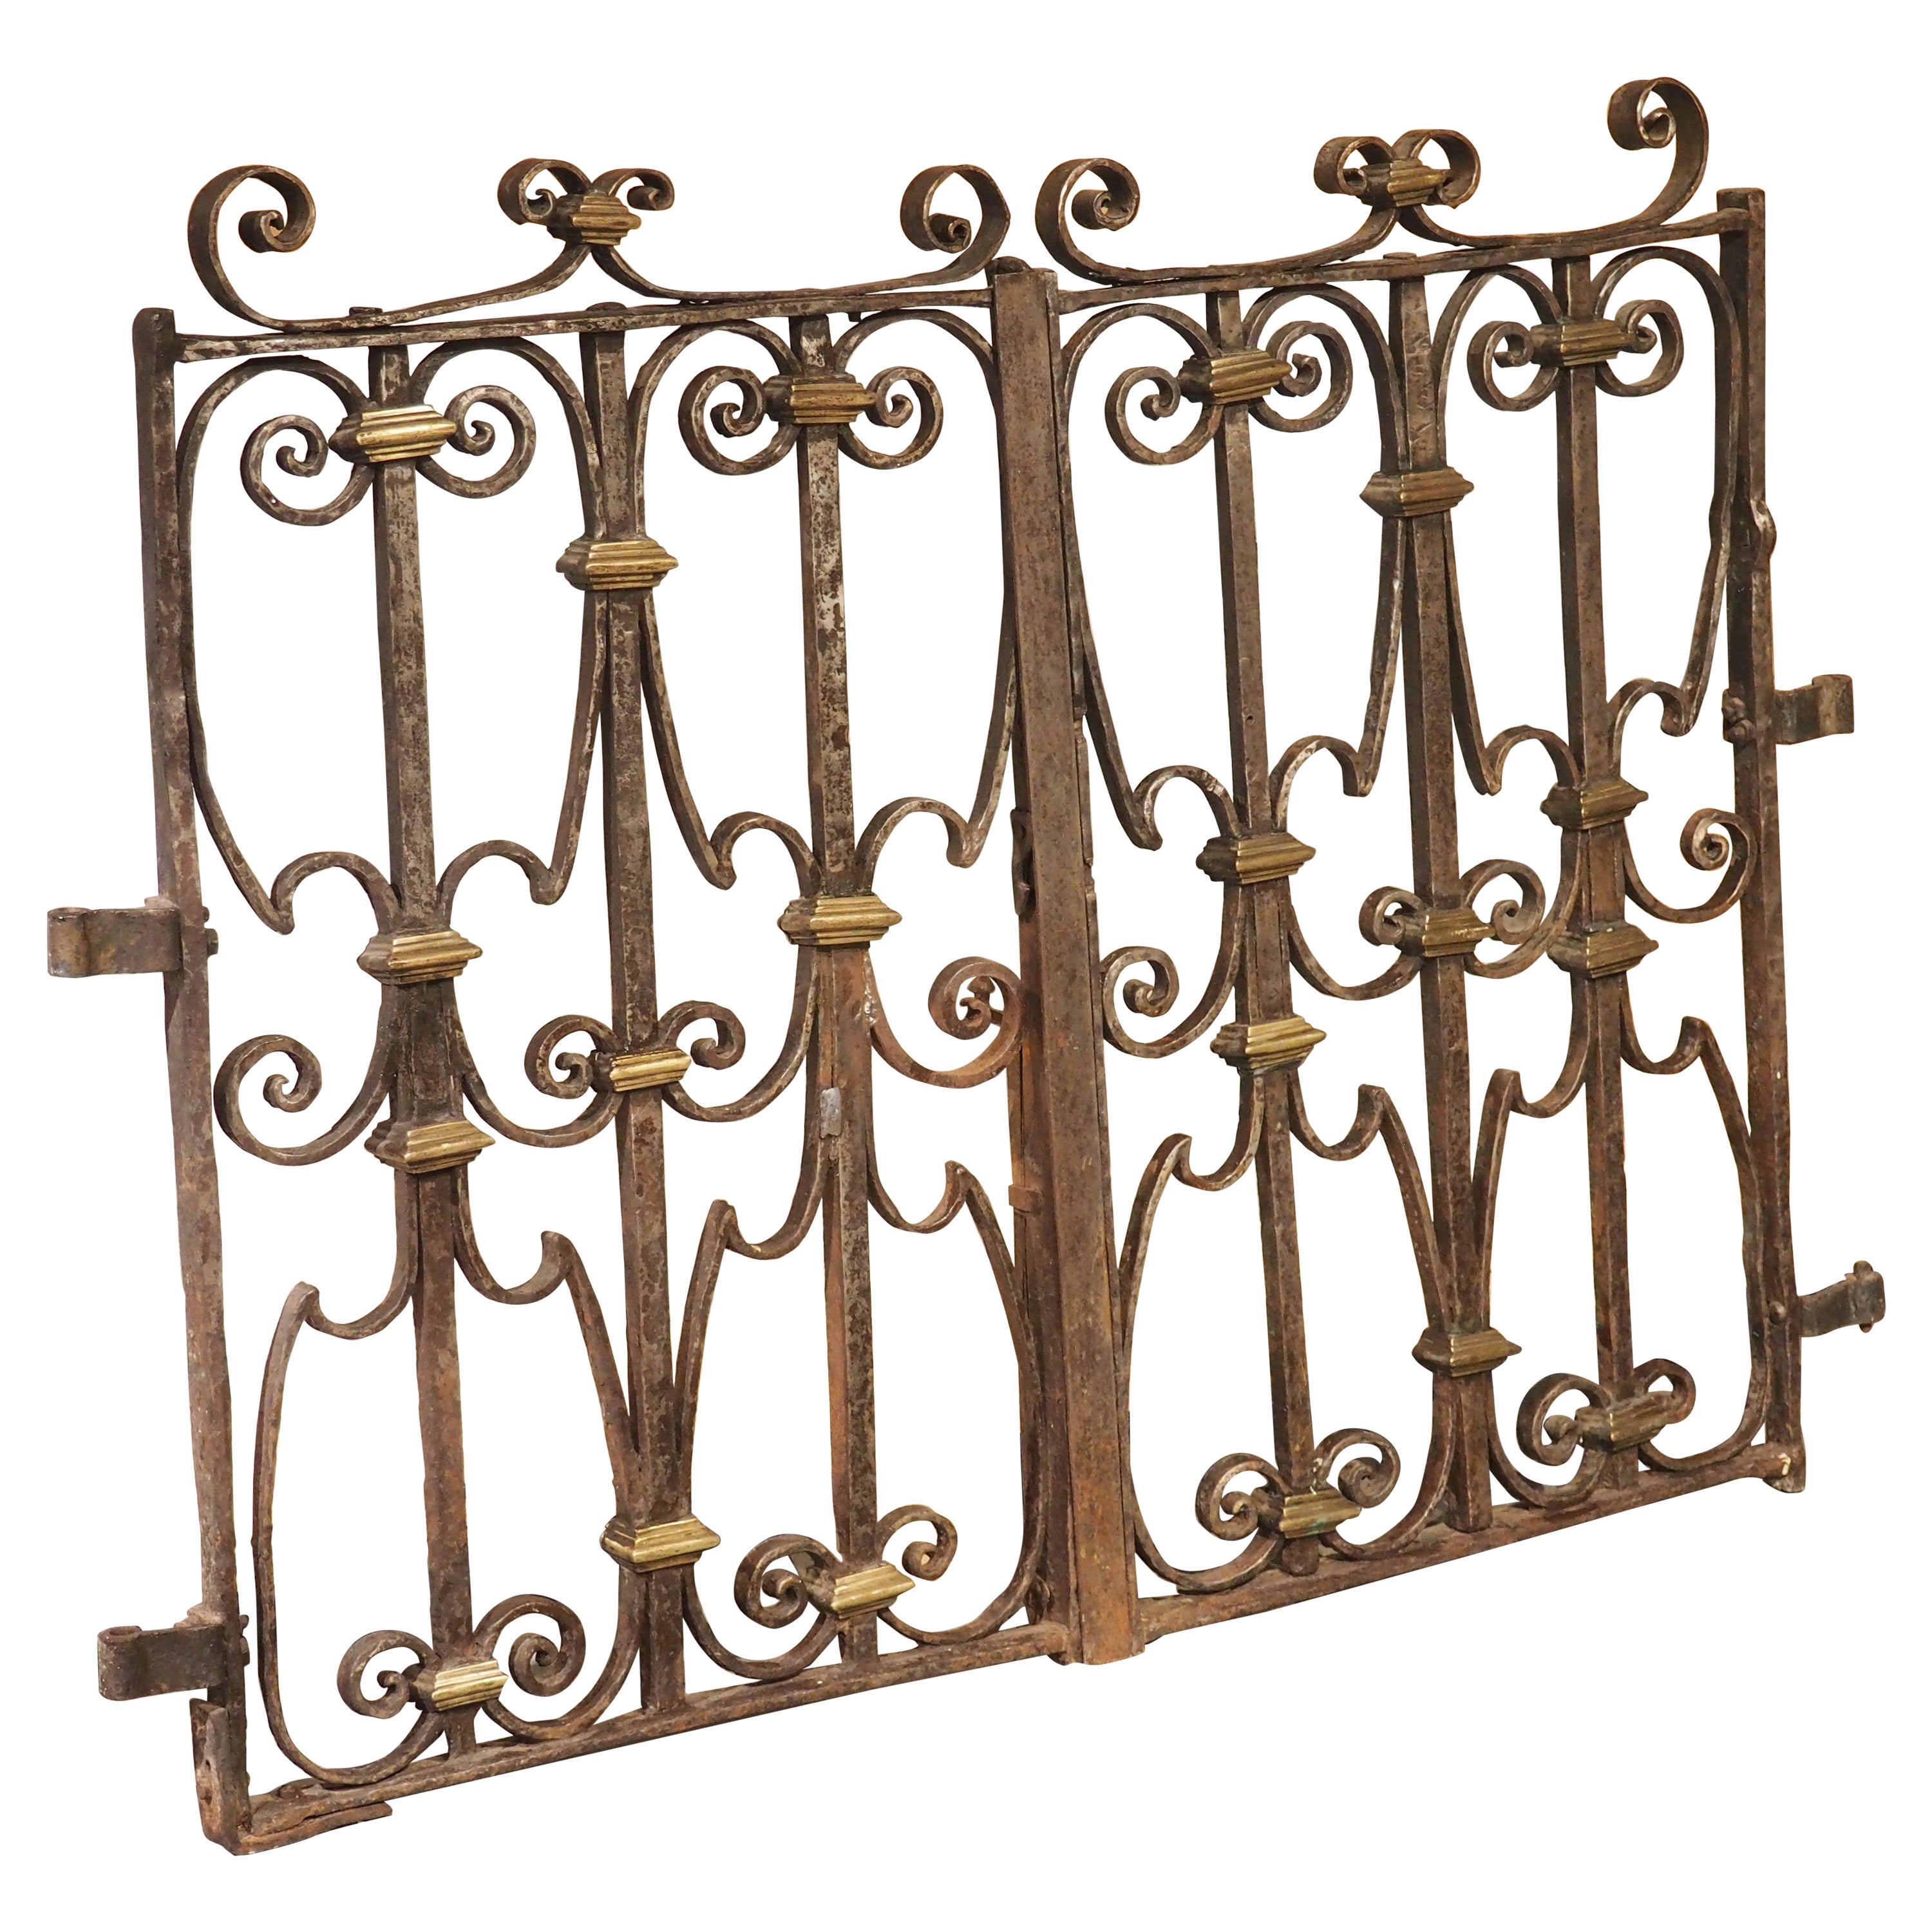 Pair of 17th Century Forged Iron and Bronze Gates from the French Basque Country